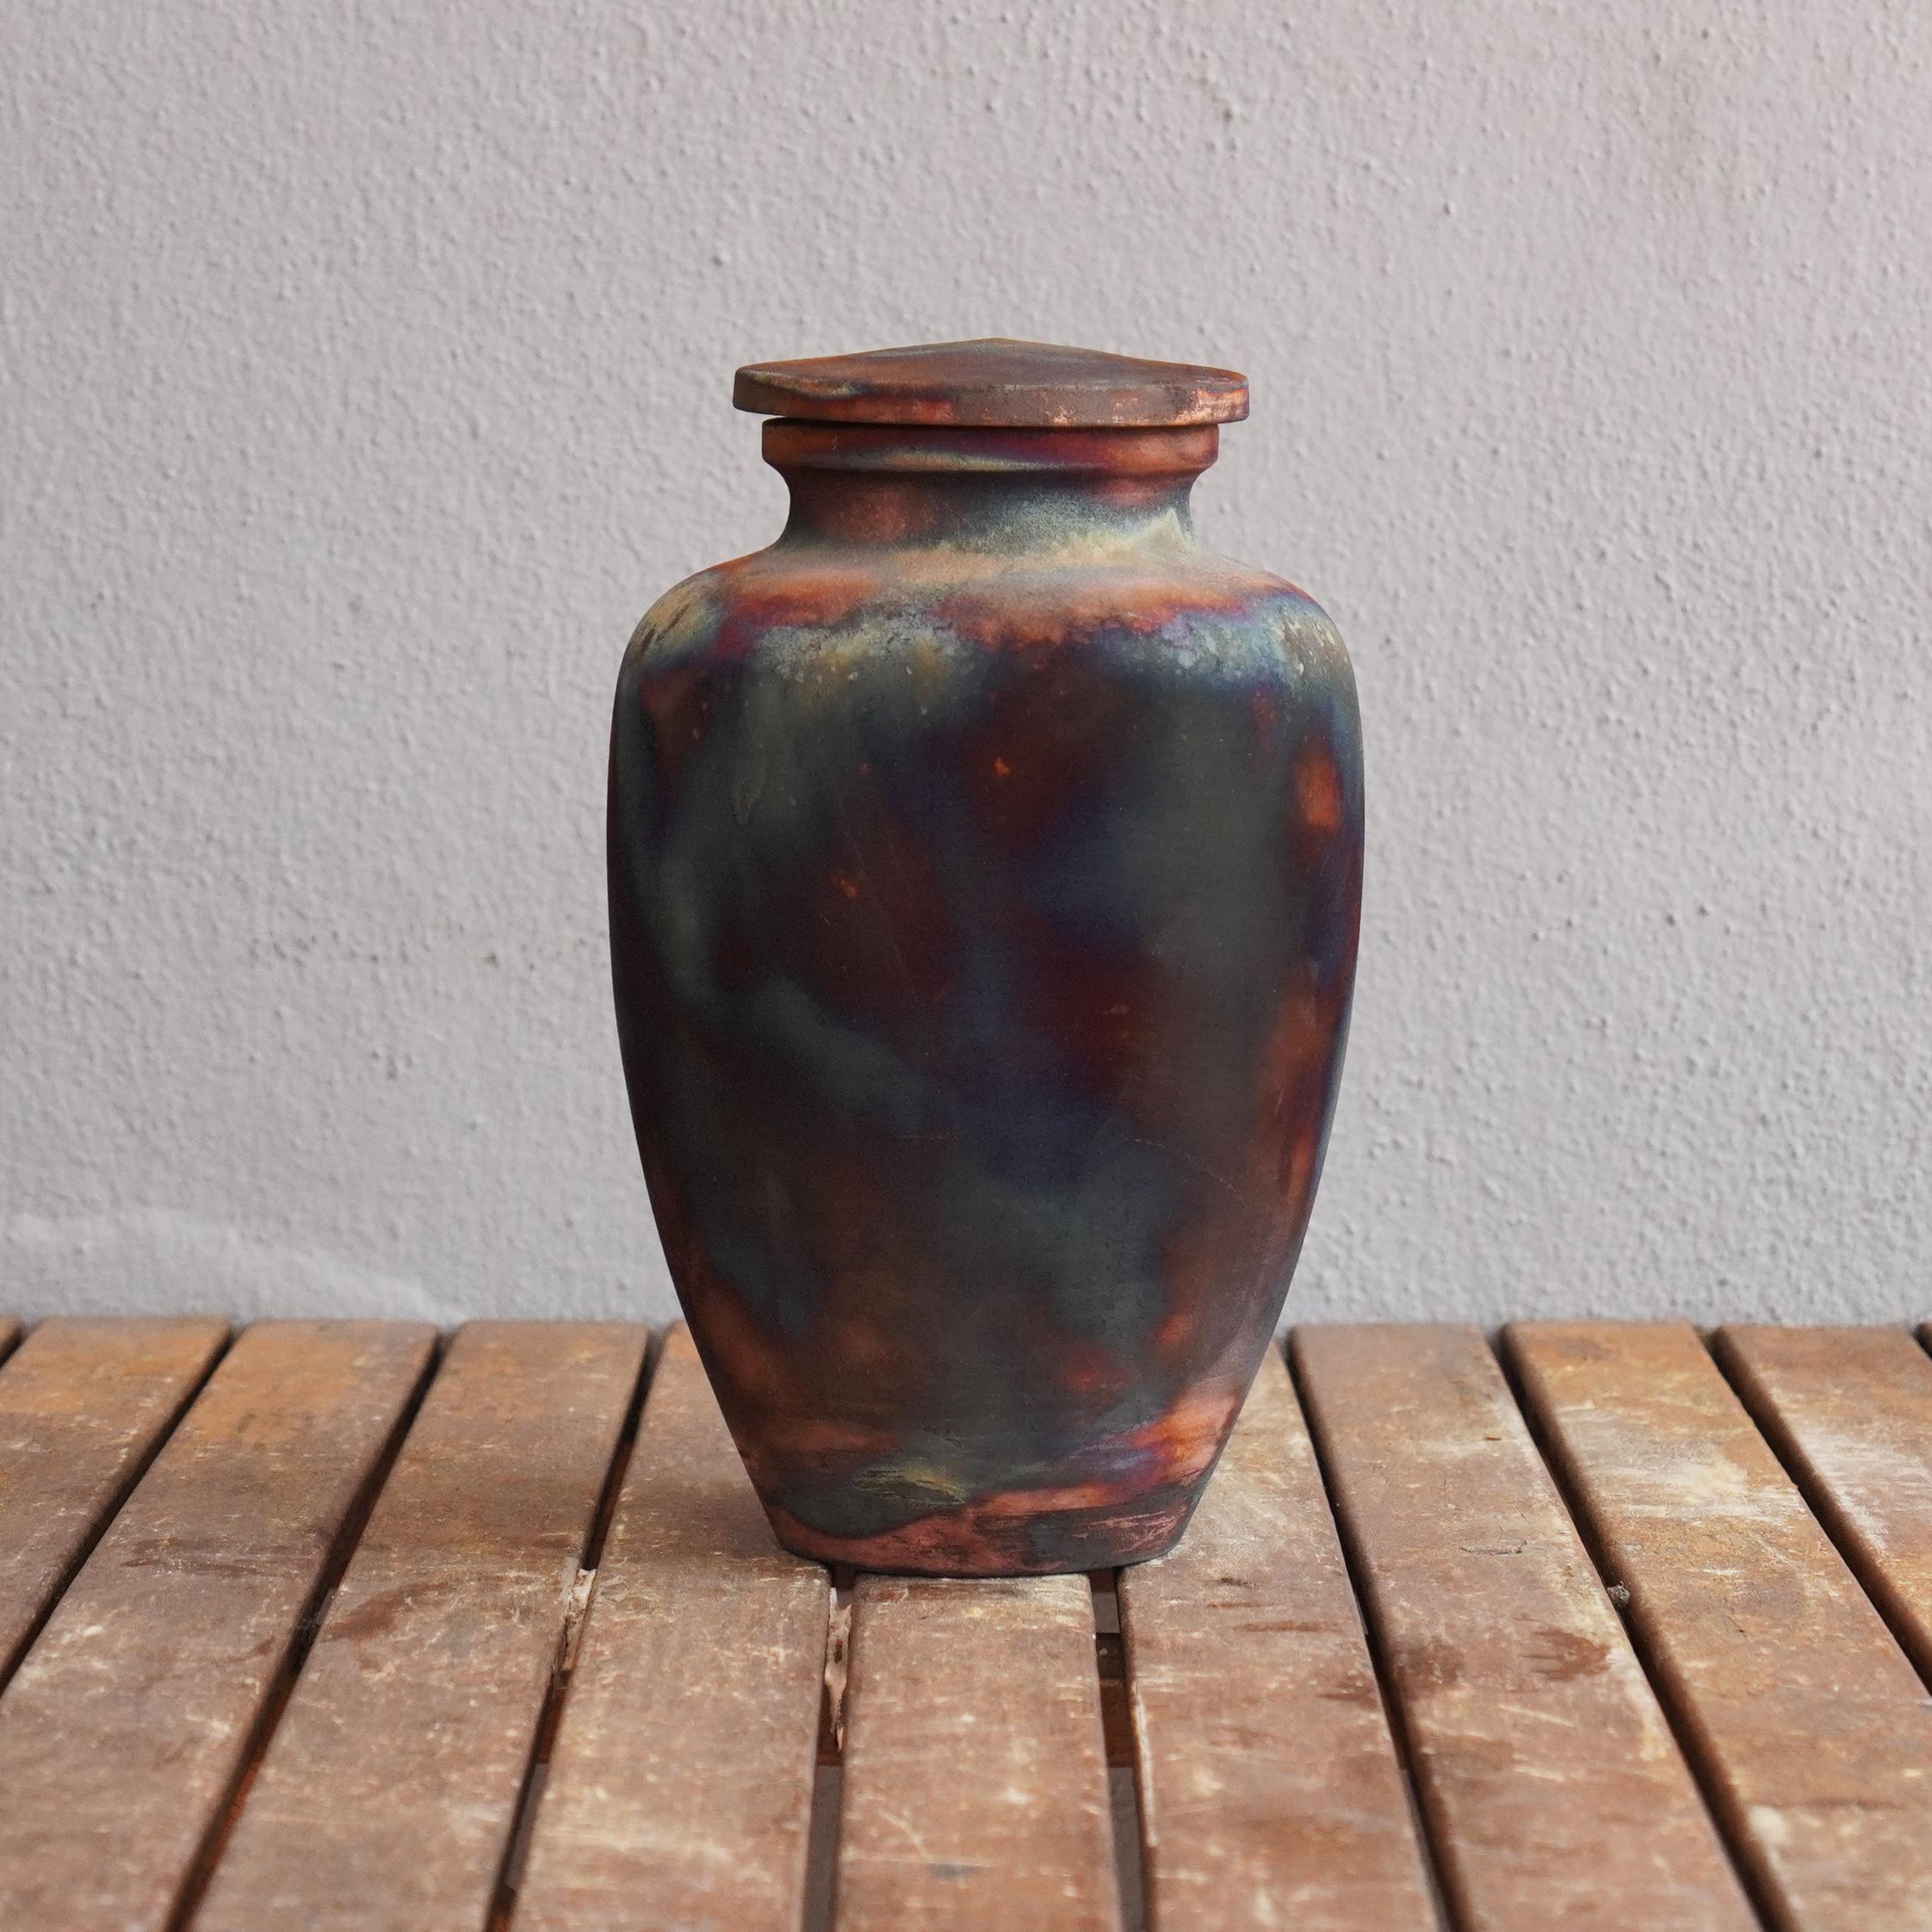 Omoide ~ (思い出) - Memories
 
 The passing of a loved one will always be a defining moment in a person's life. The Omoide Urn is a one of a kind ceramic art piece that offers a focal point to reminisce on the mememories left behind by your loved one.
